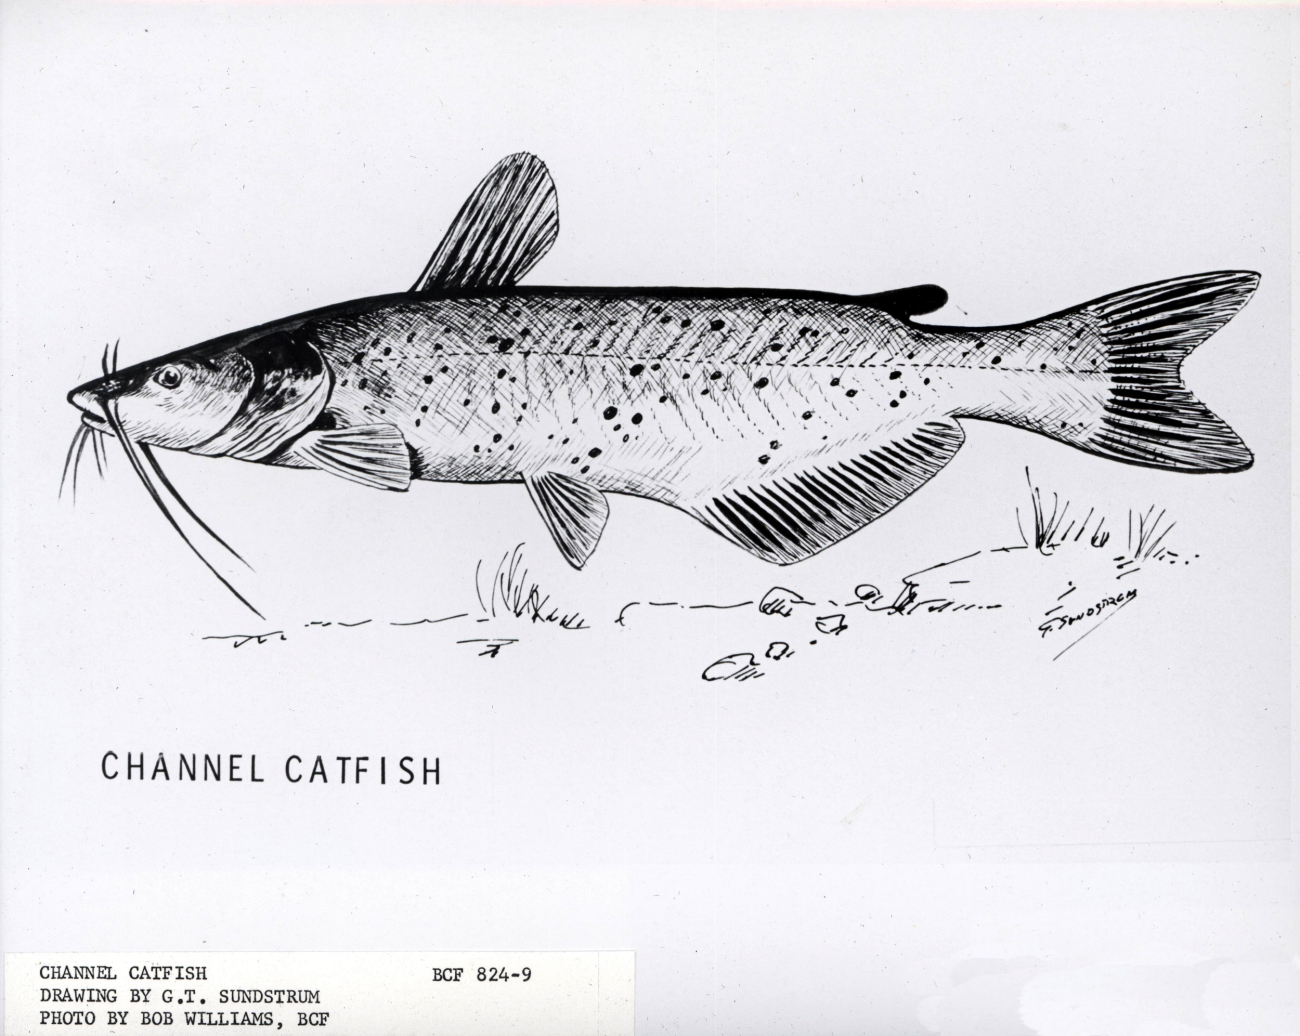 Artwork - Channel catfish, drawing by G